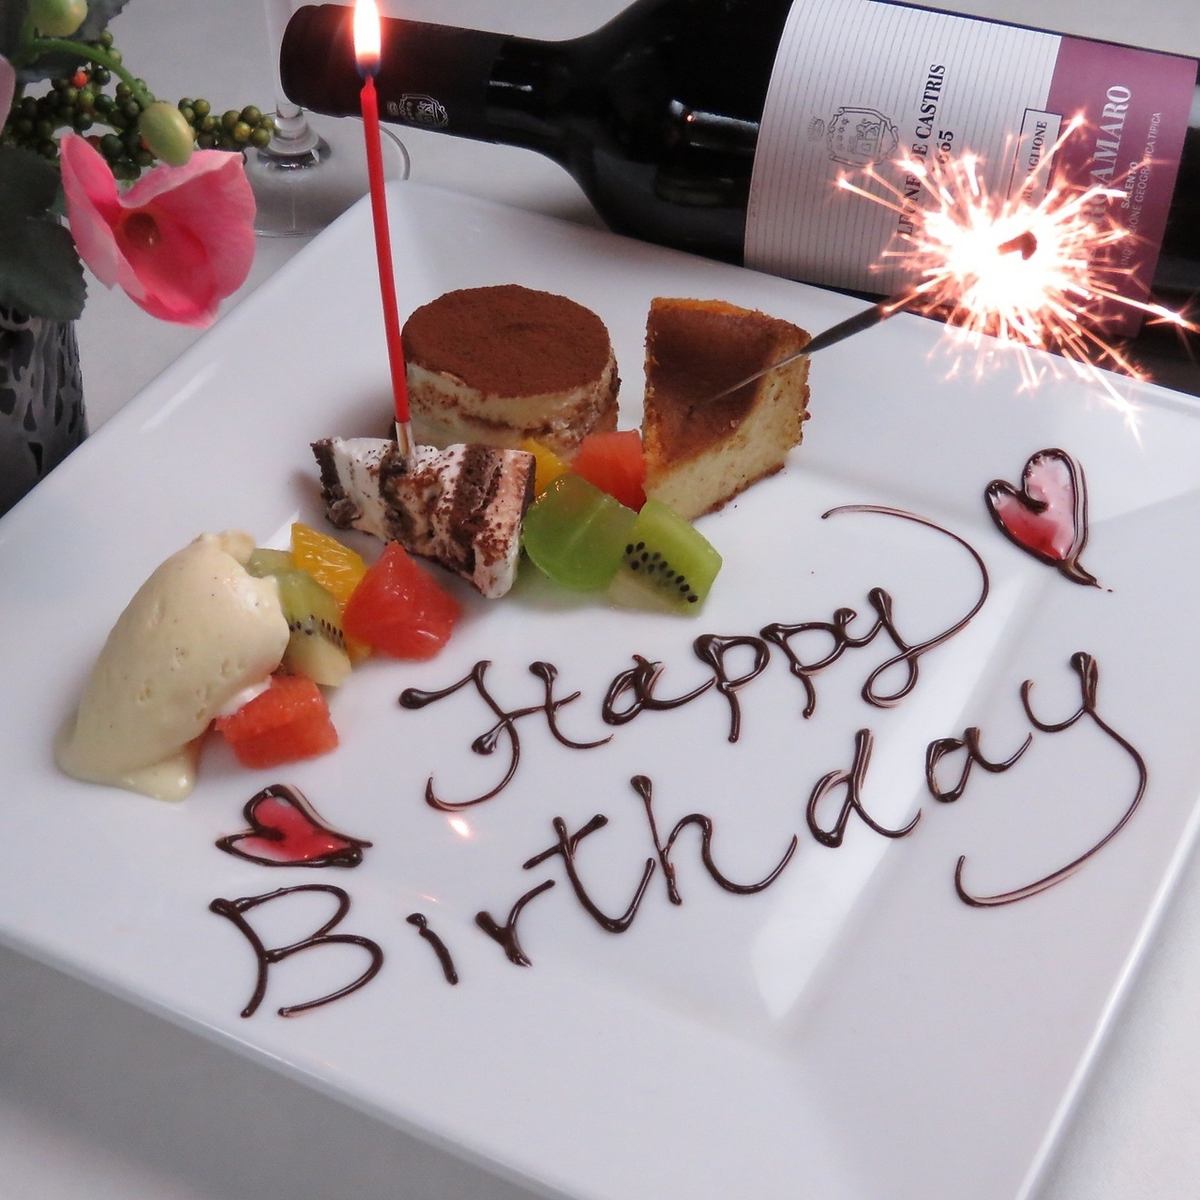 For a birthday date ◎ Message dessert & candle service